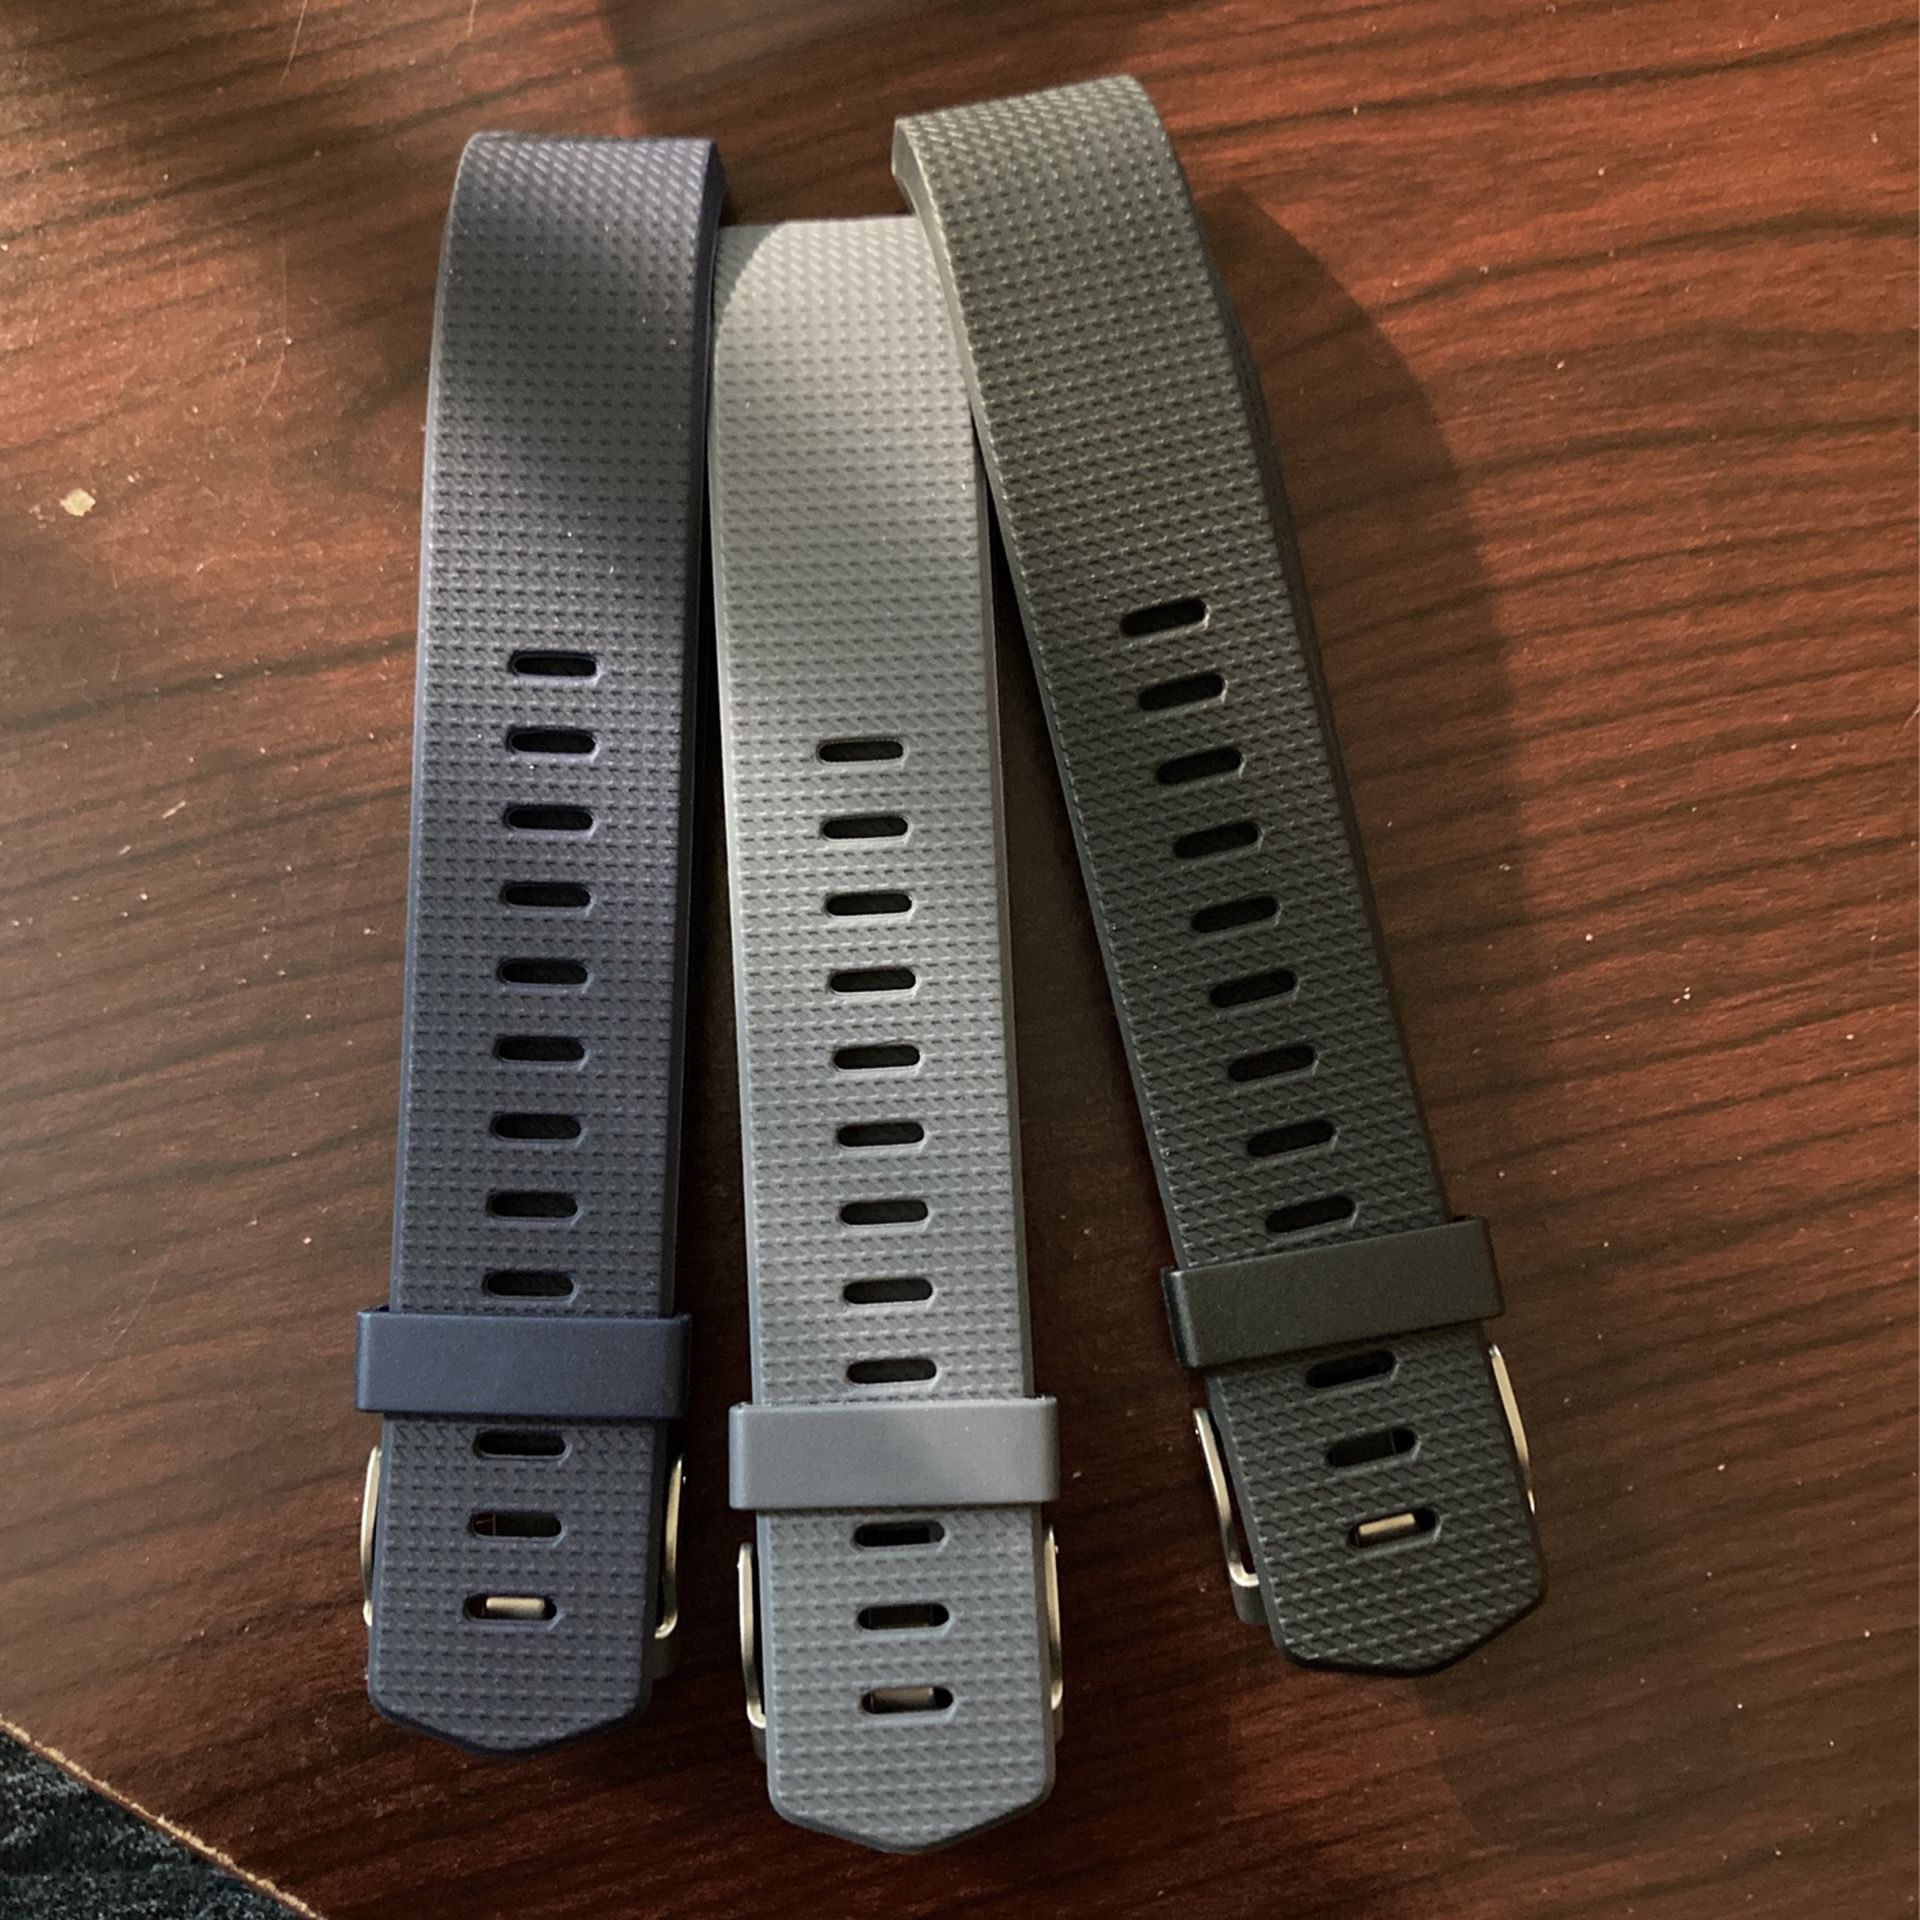 Bands Black Gray And Blue 